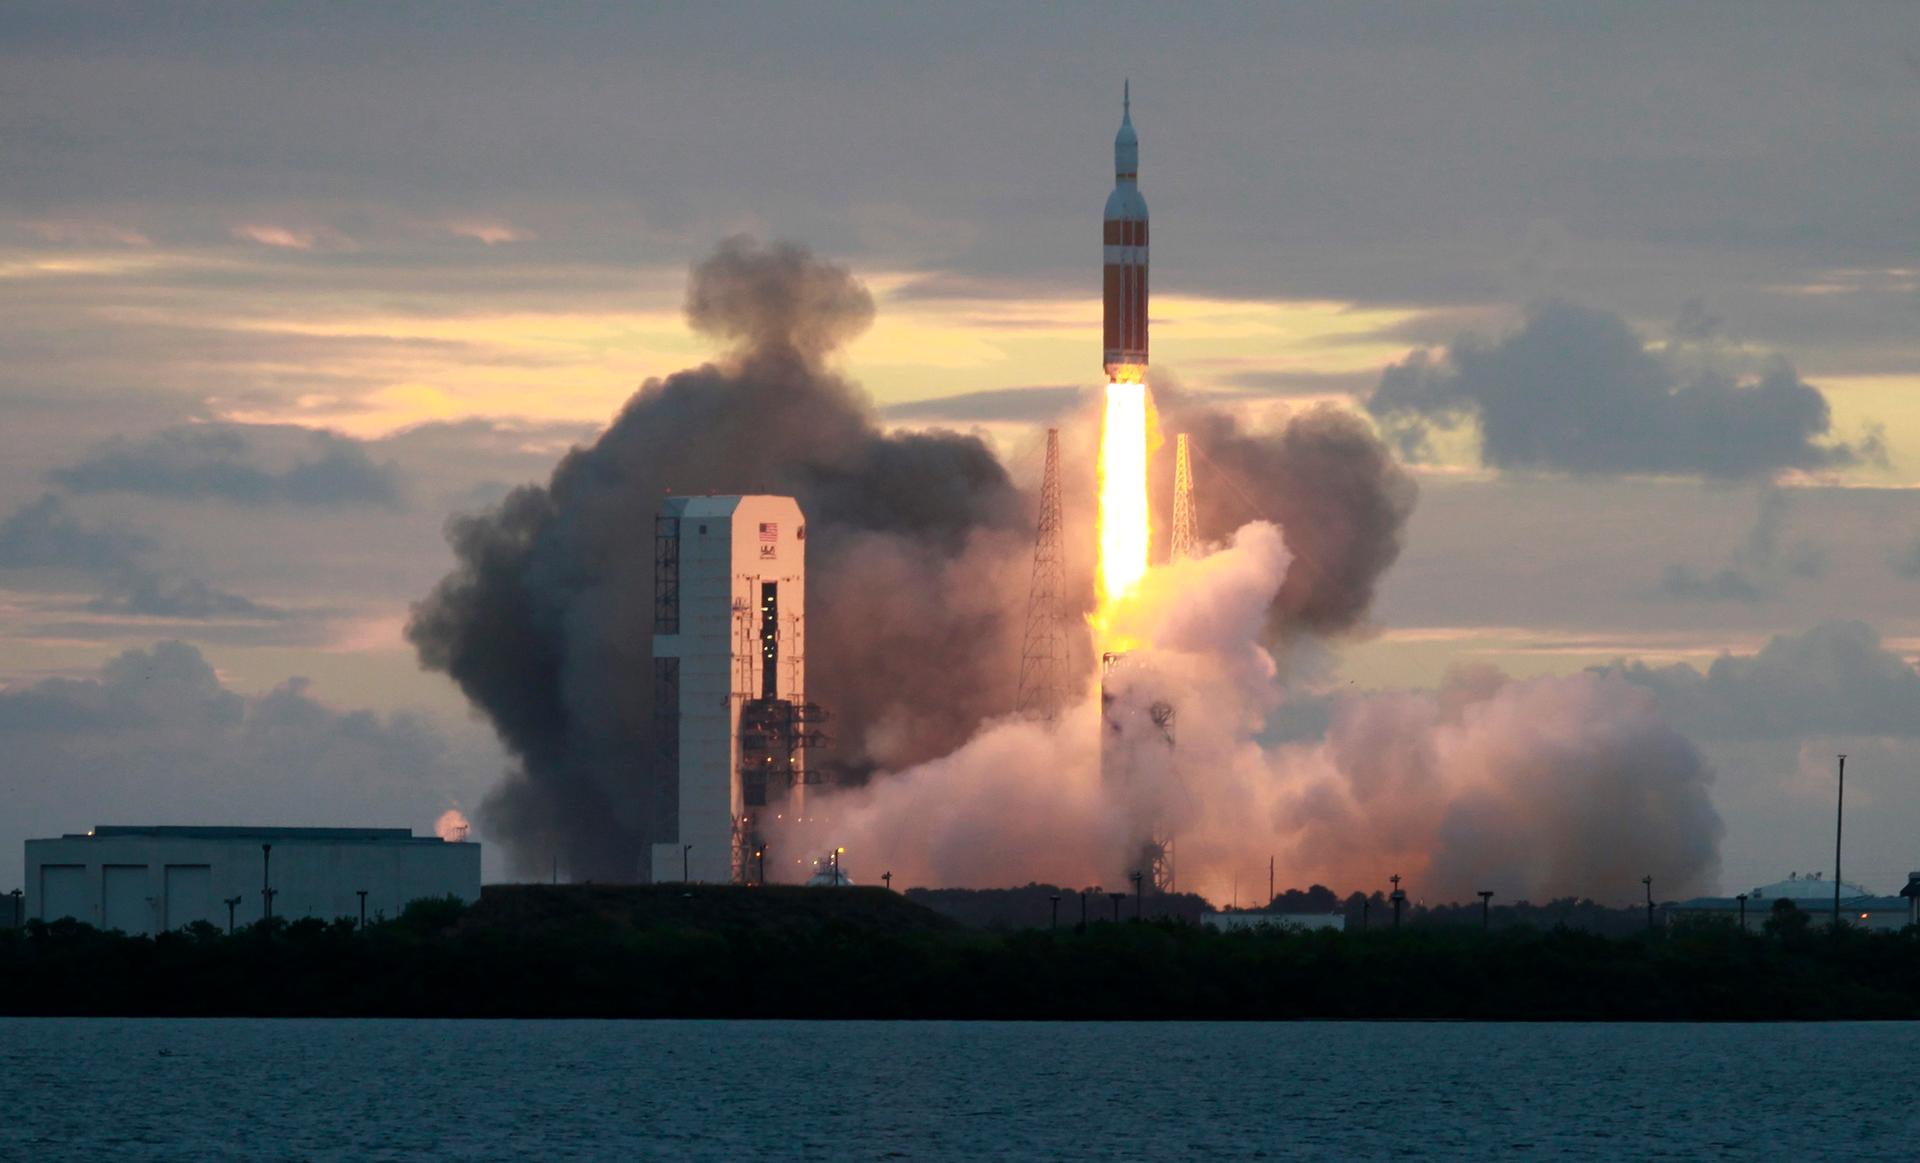 The Delta IV Heavy rocket with the Orion spacecraft lifts off from the Cape Canaveral Air Force Station on December 5, 2014.